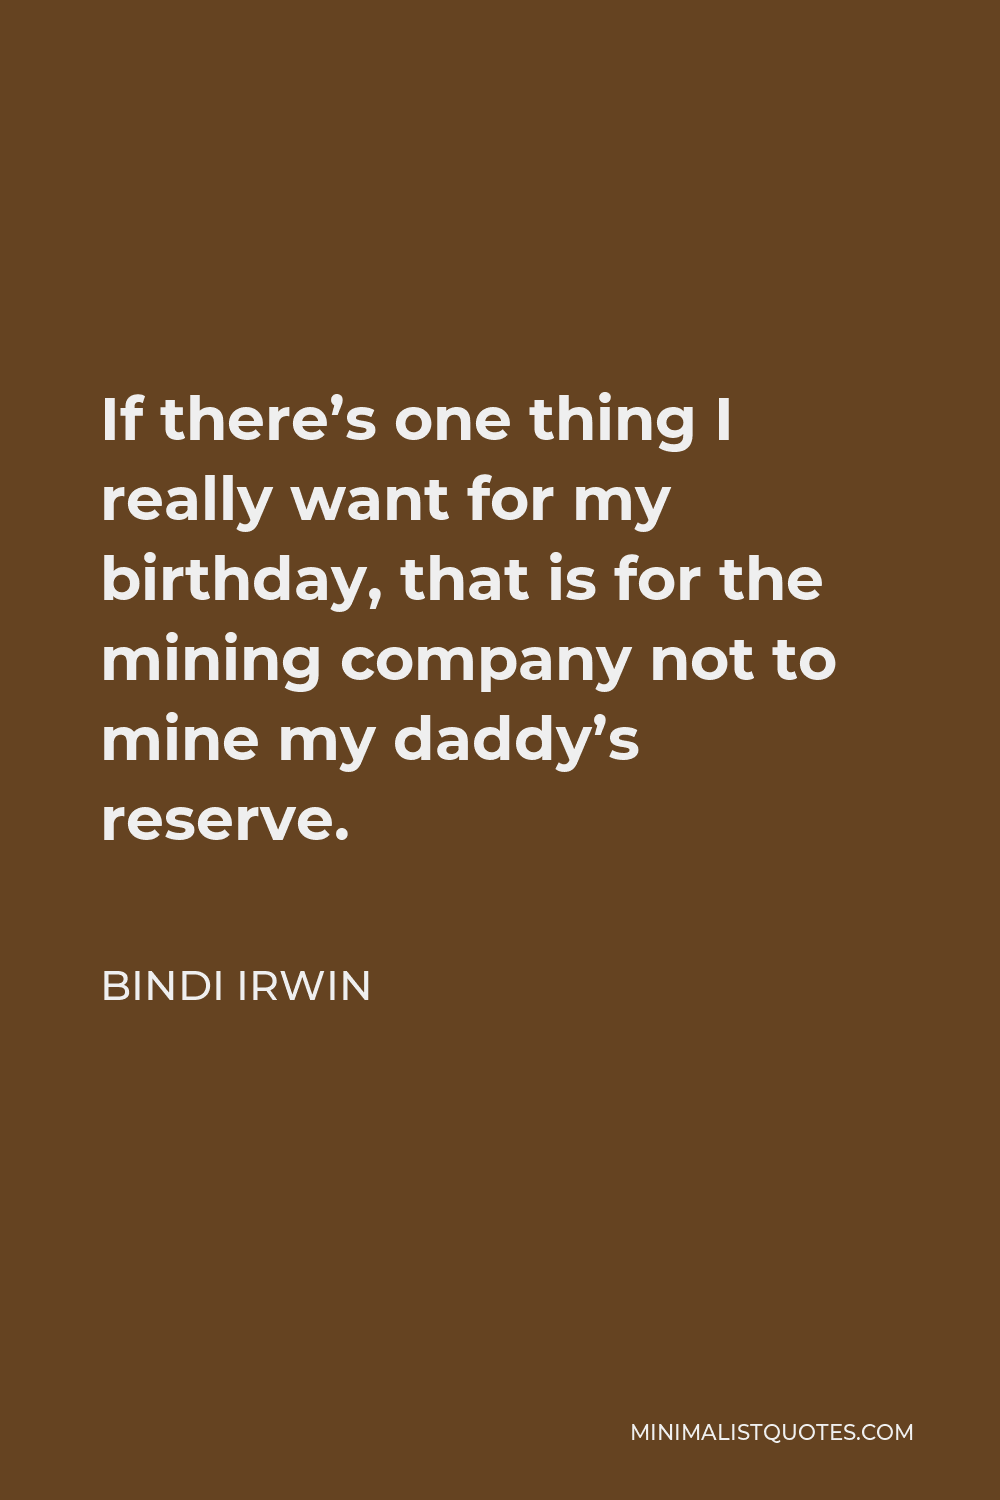 Bindi Irwin Quote - If there’s one thing I really want for my birthday, that is for the mining company not to mine my daddy’s reserve.